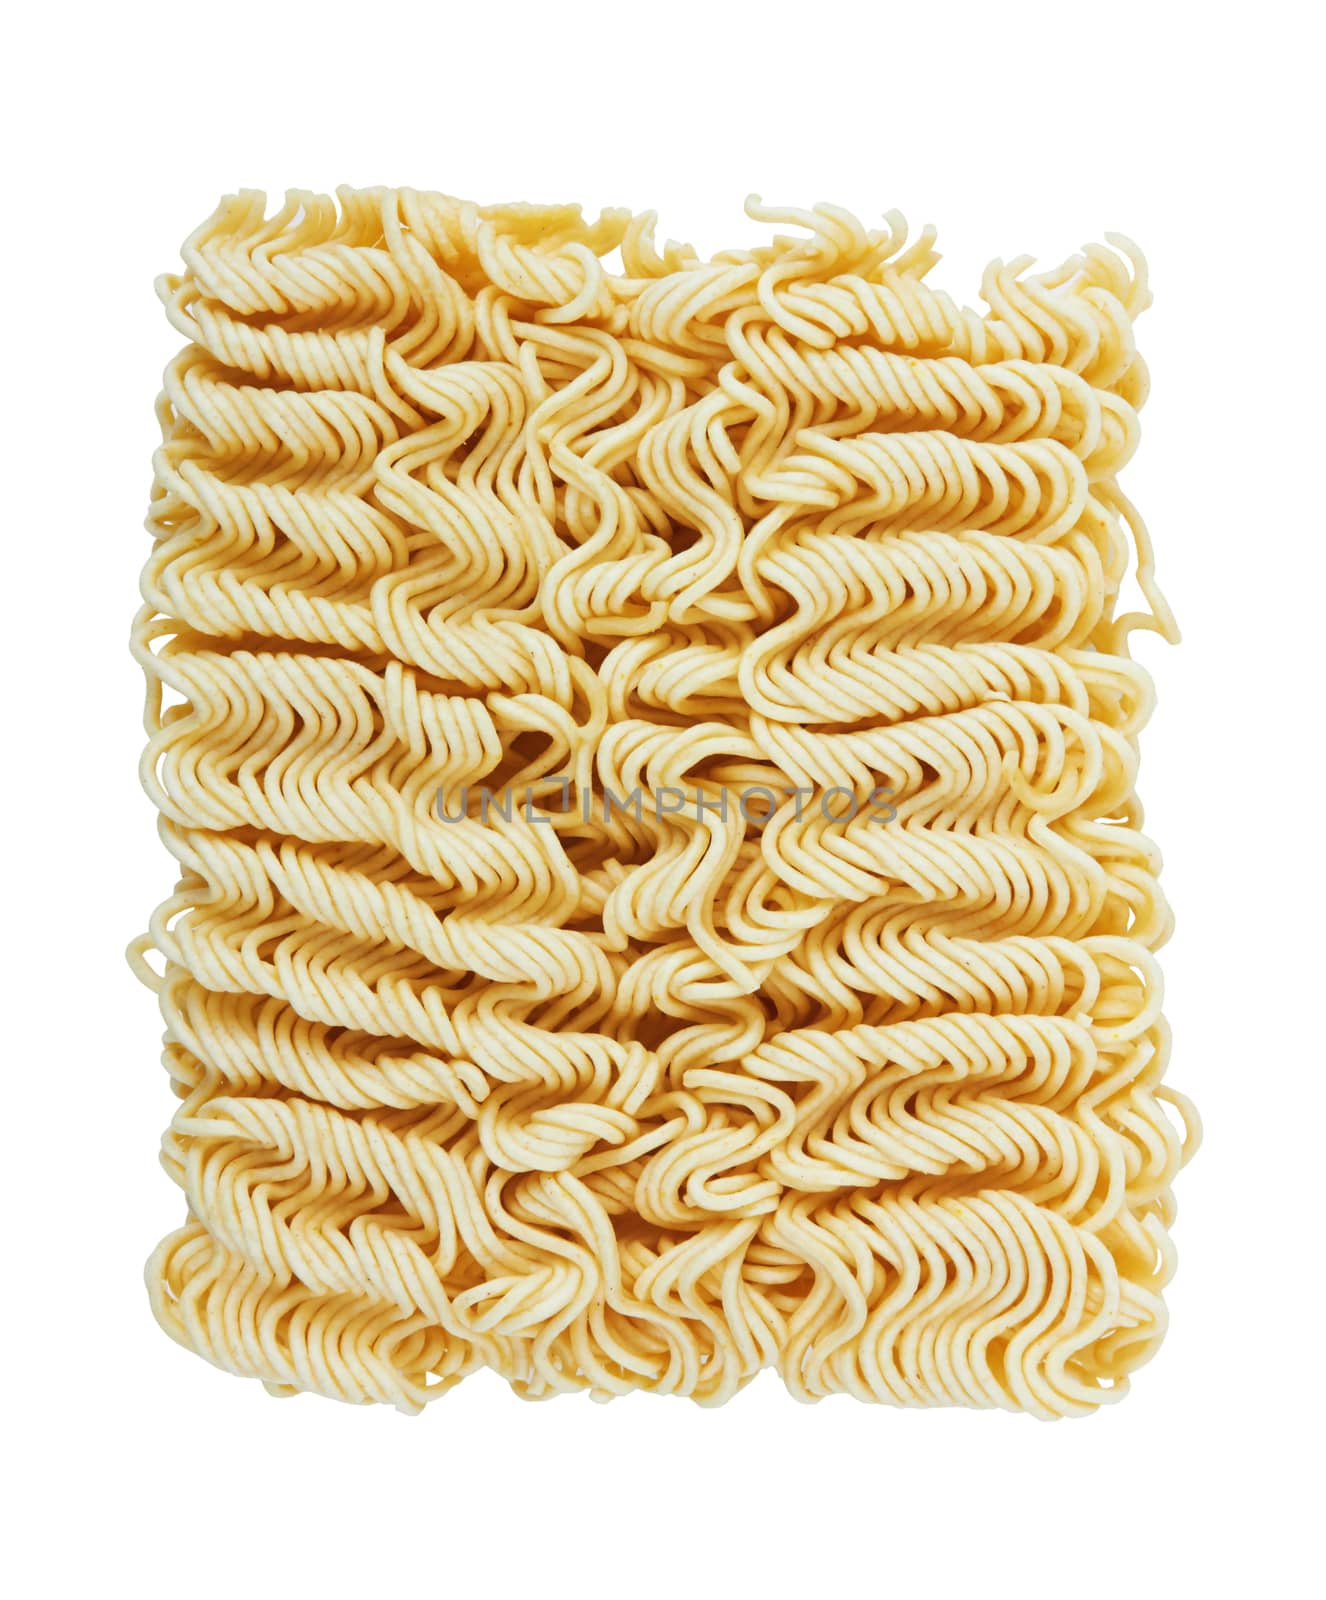 instant noodles on a white background by pioneer111